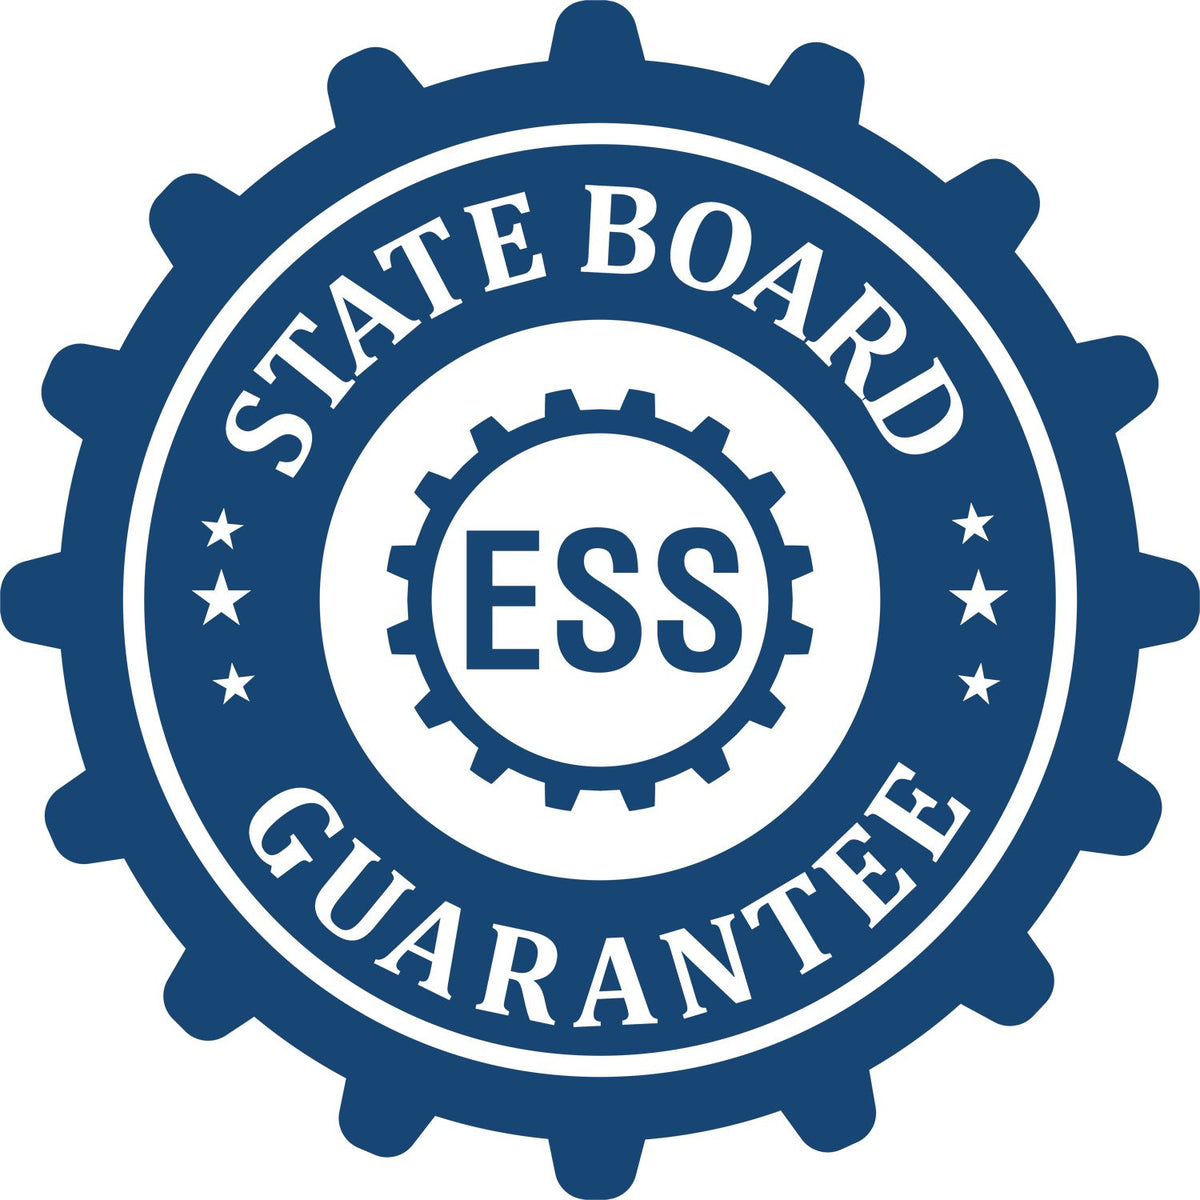 An emblem in a gear shape illustrating a state board guarantee for the Heavy-Duty Louisiana Rectangular Notary Stamp product.